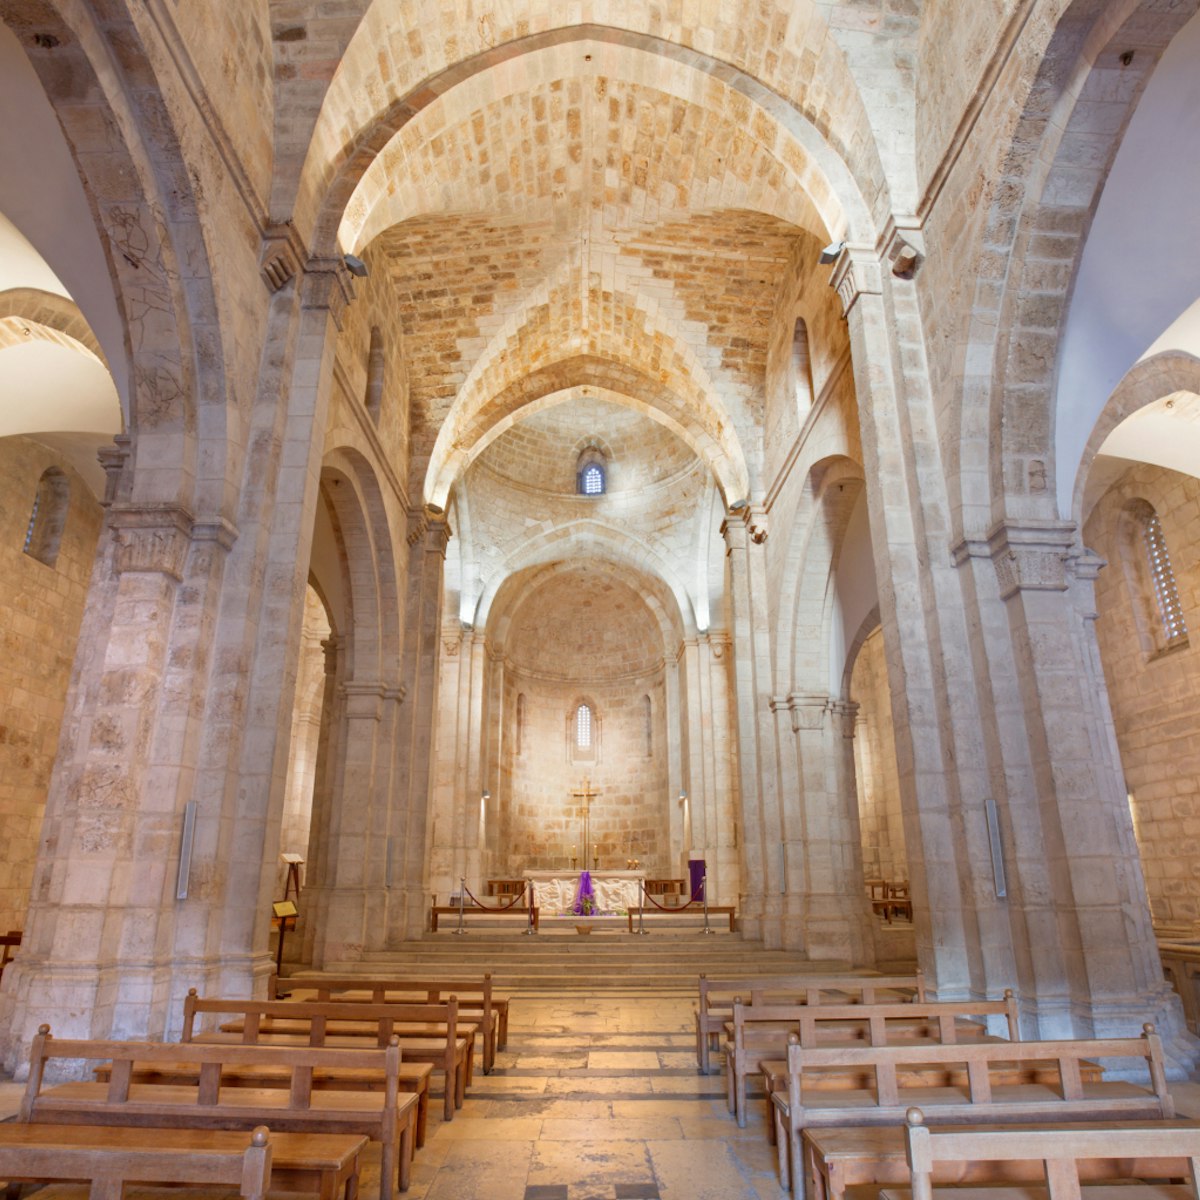 Jerusalem - The gothic nave of St. Anne gothic church as the first station of Via Dolorosa or Via crucis.